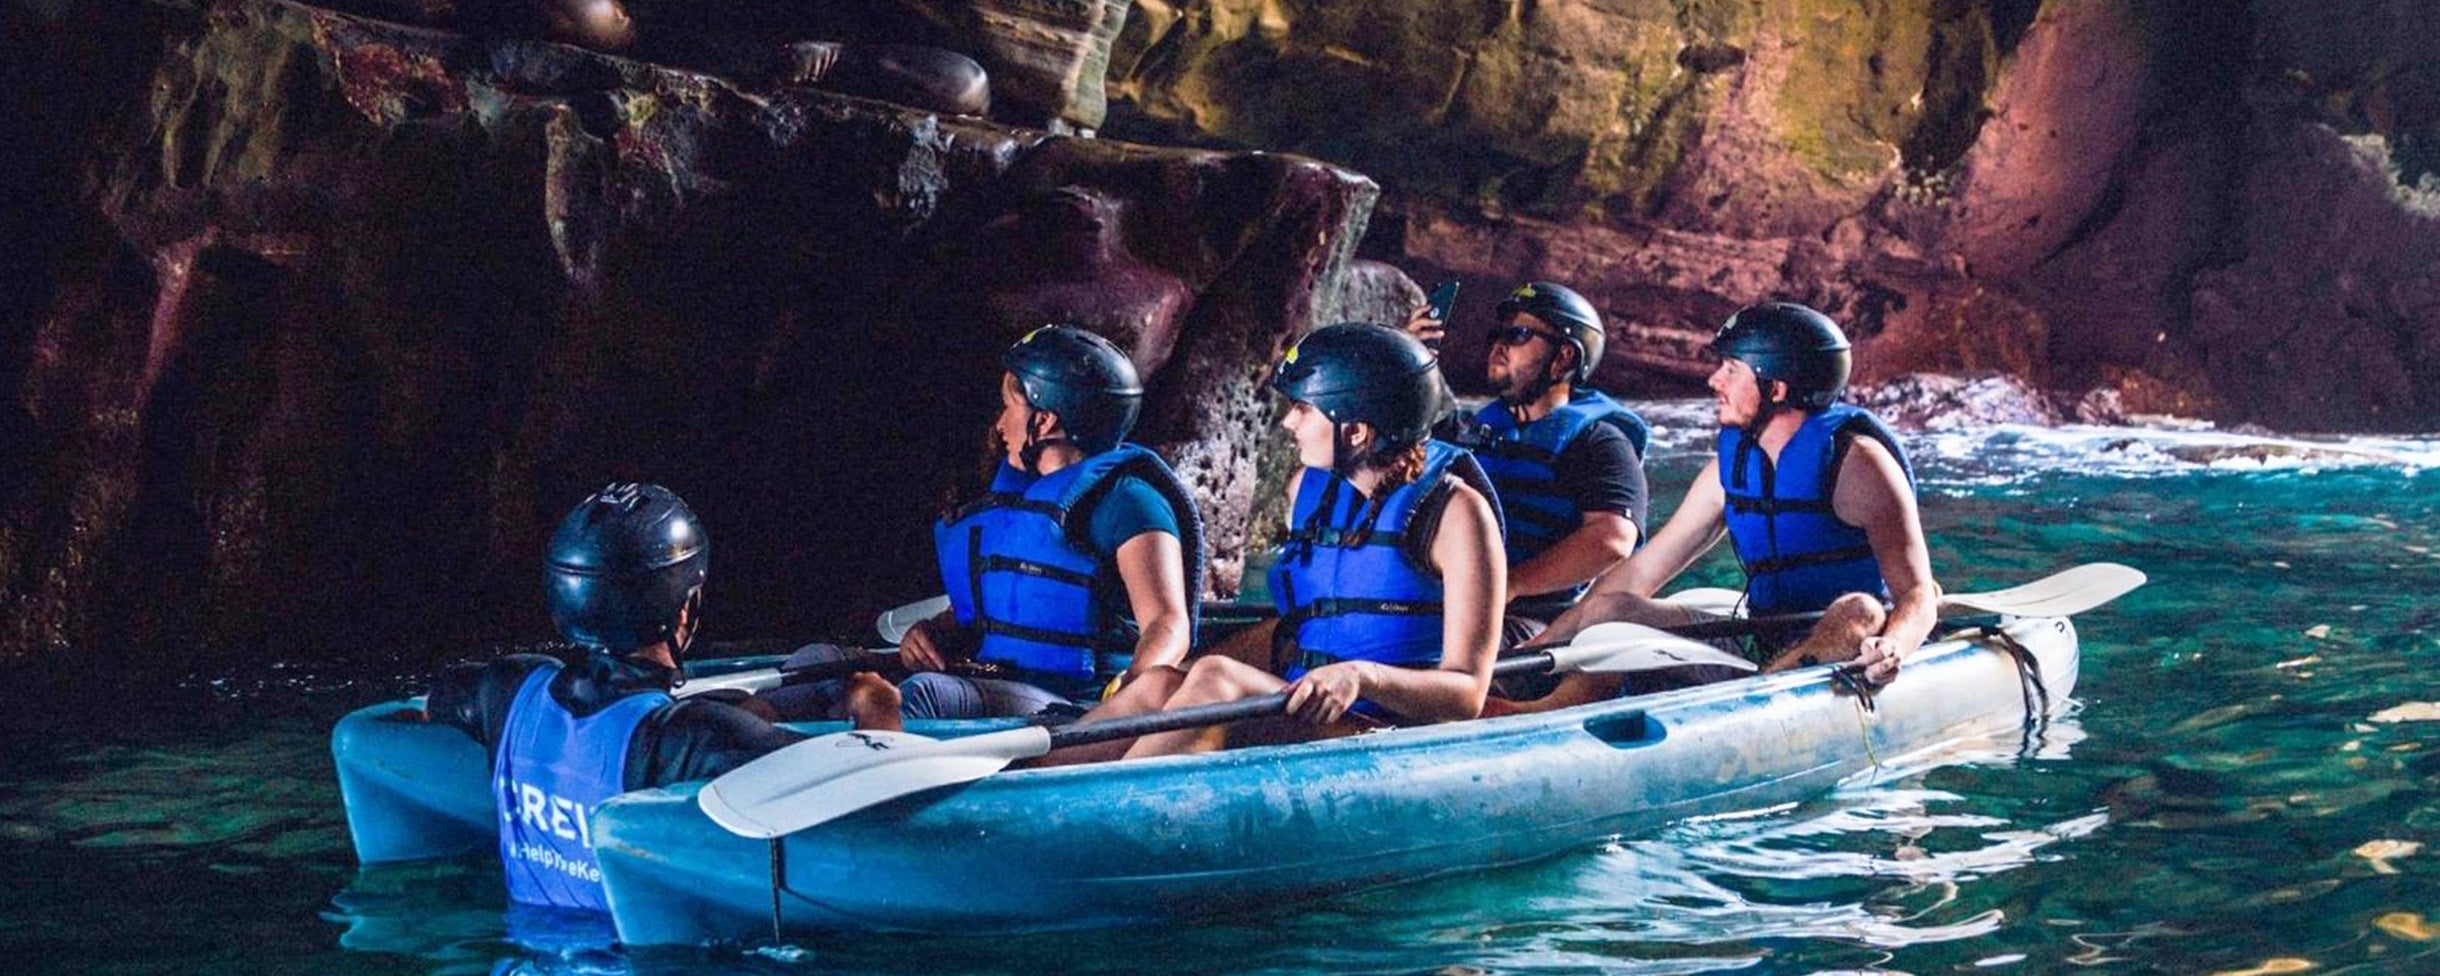 A group of 4 kayakers sitting on their kayaks inside of one of the Seven Sea Caves, learning about the history of La Jolla from their Everyday California tour guide who sits nearby in the water.